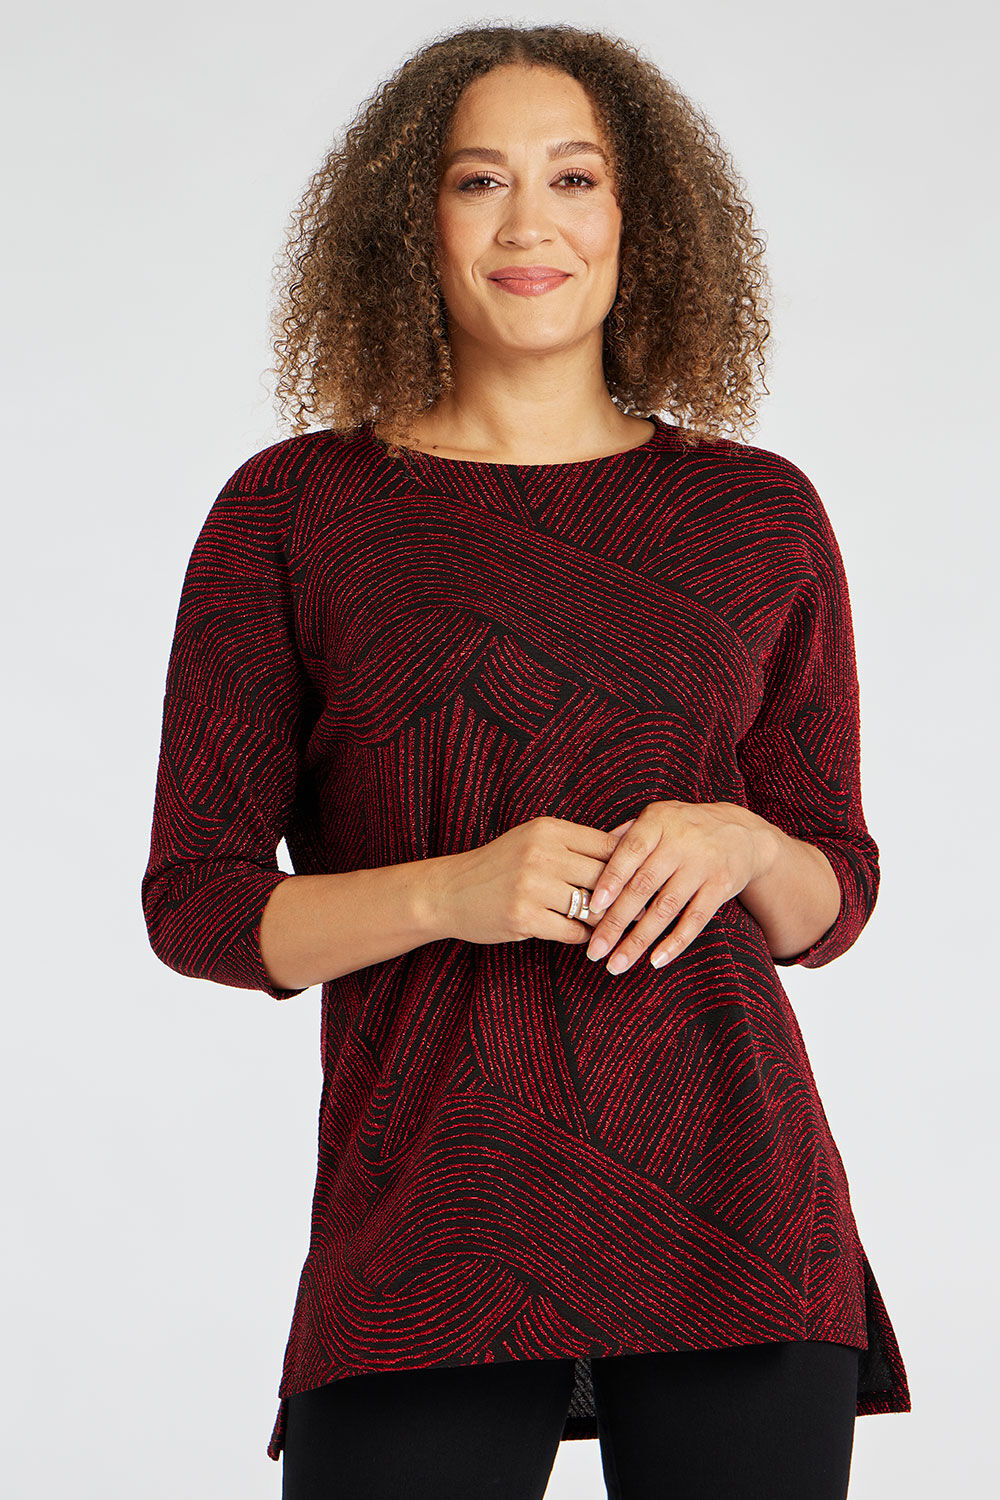 Bonmarche Red Half Sleeve Sparkle Jersey Top, Size: 10